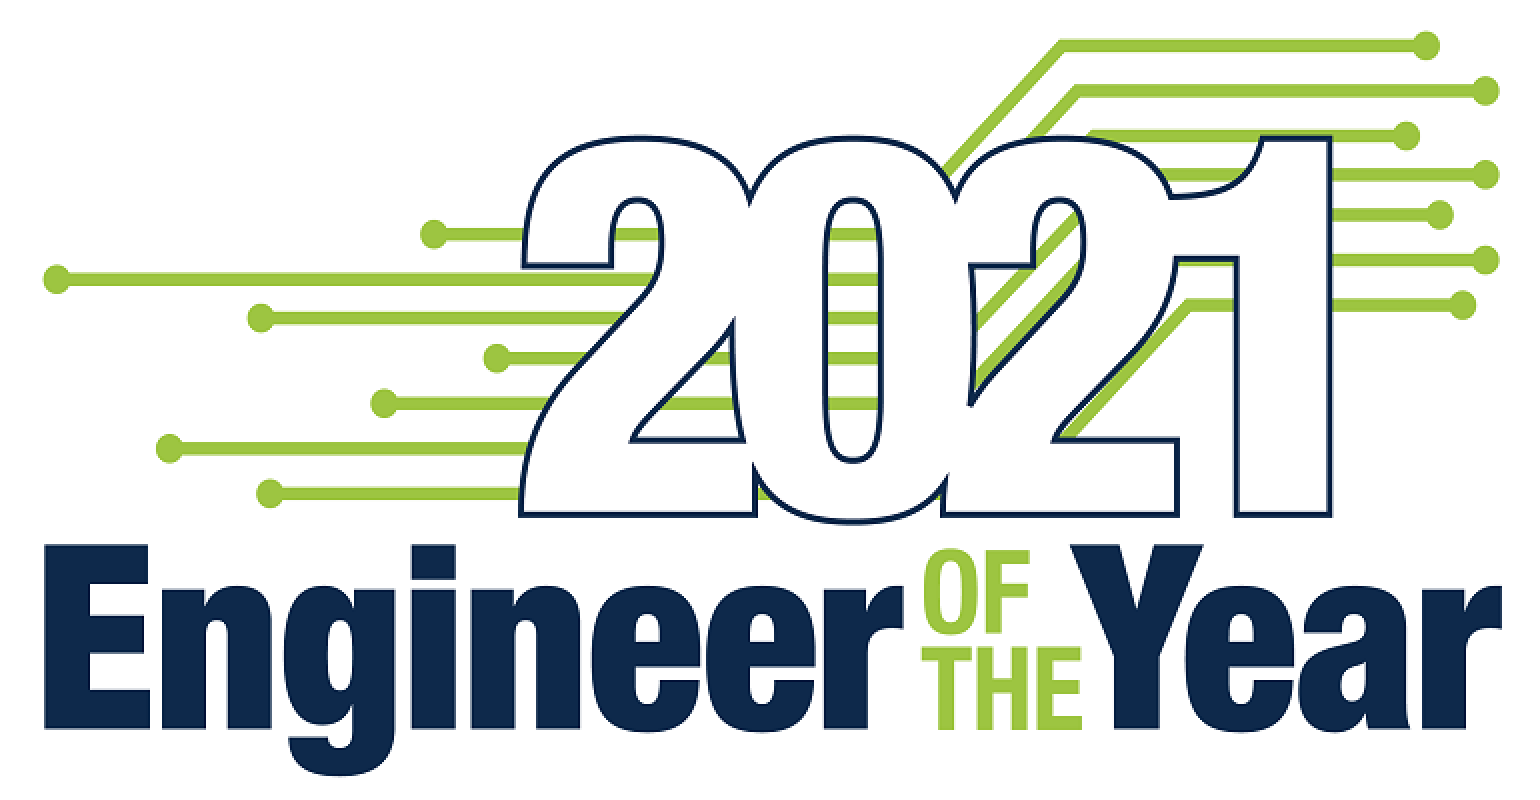 P1_8538_DC21_Logo Design_2021_Engineer_of_the_Year_DC21_EOY_vertical (002).png